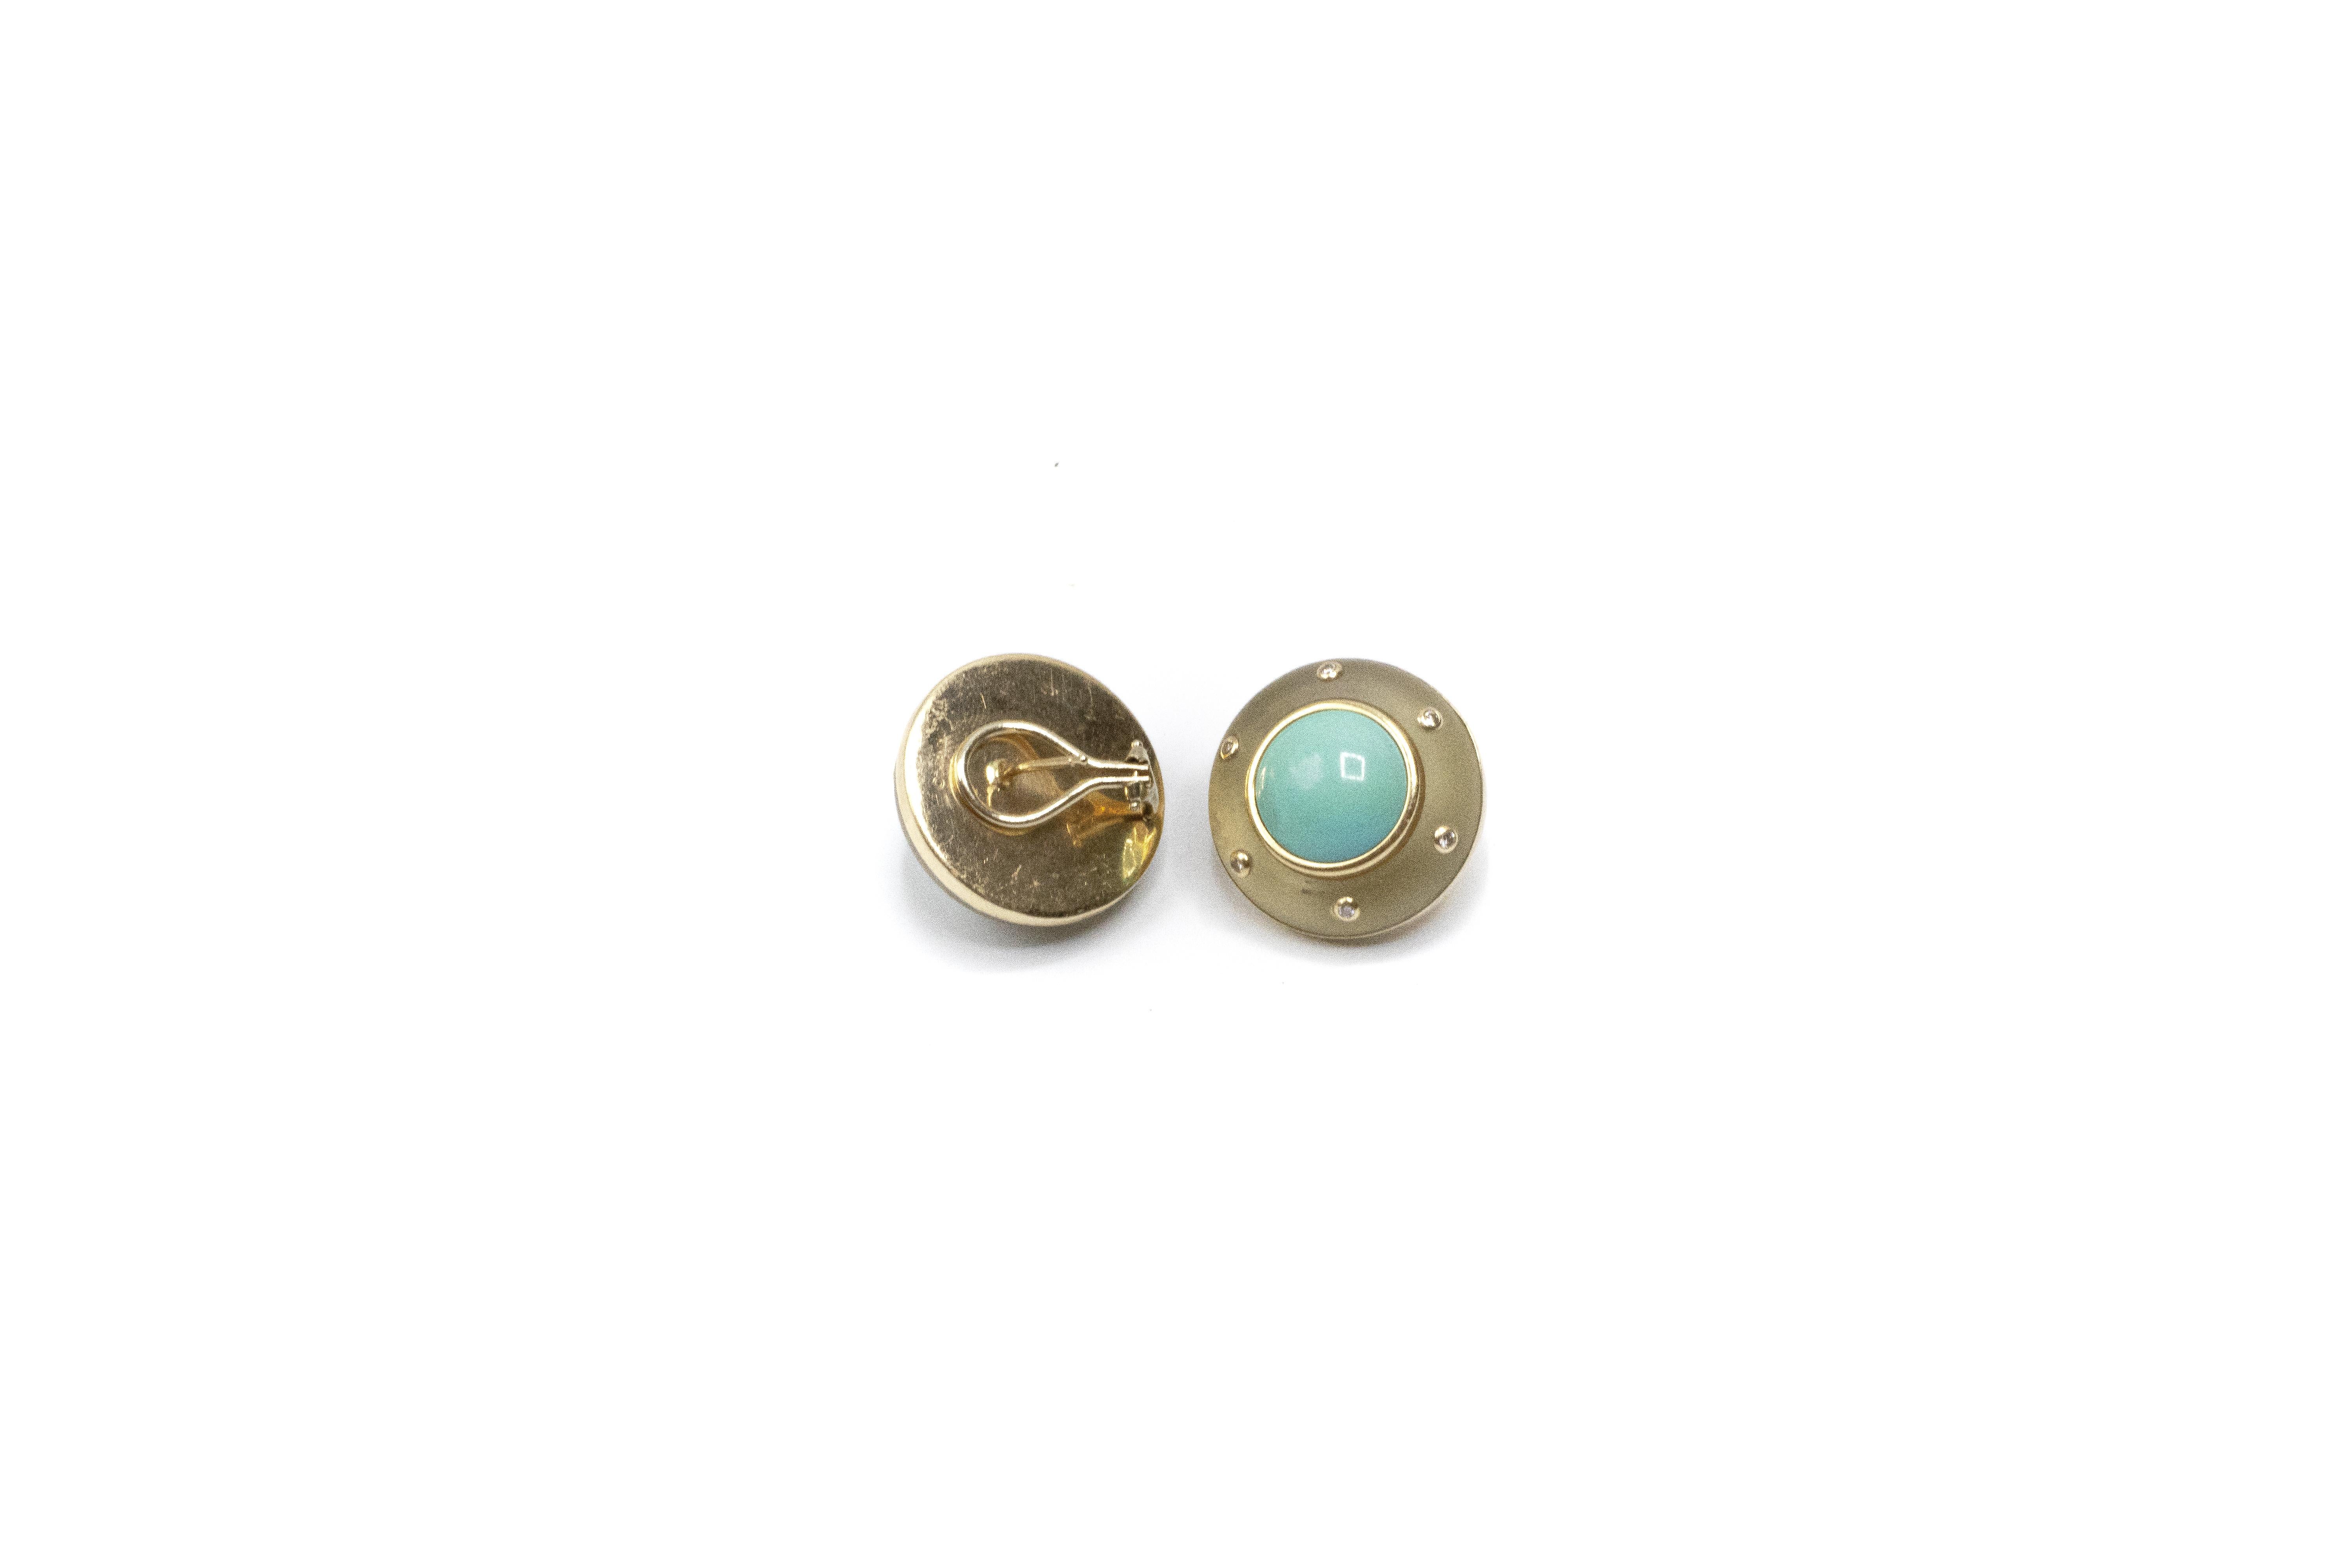 Turquoise Diamond 14kt Gold Earrings. Turquoise cabochon centers with six diamonds on each earring. Total weight 22.66